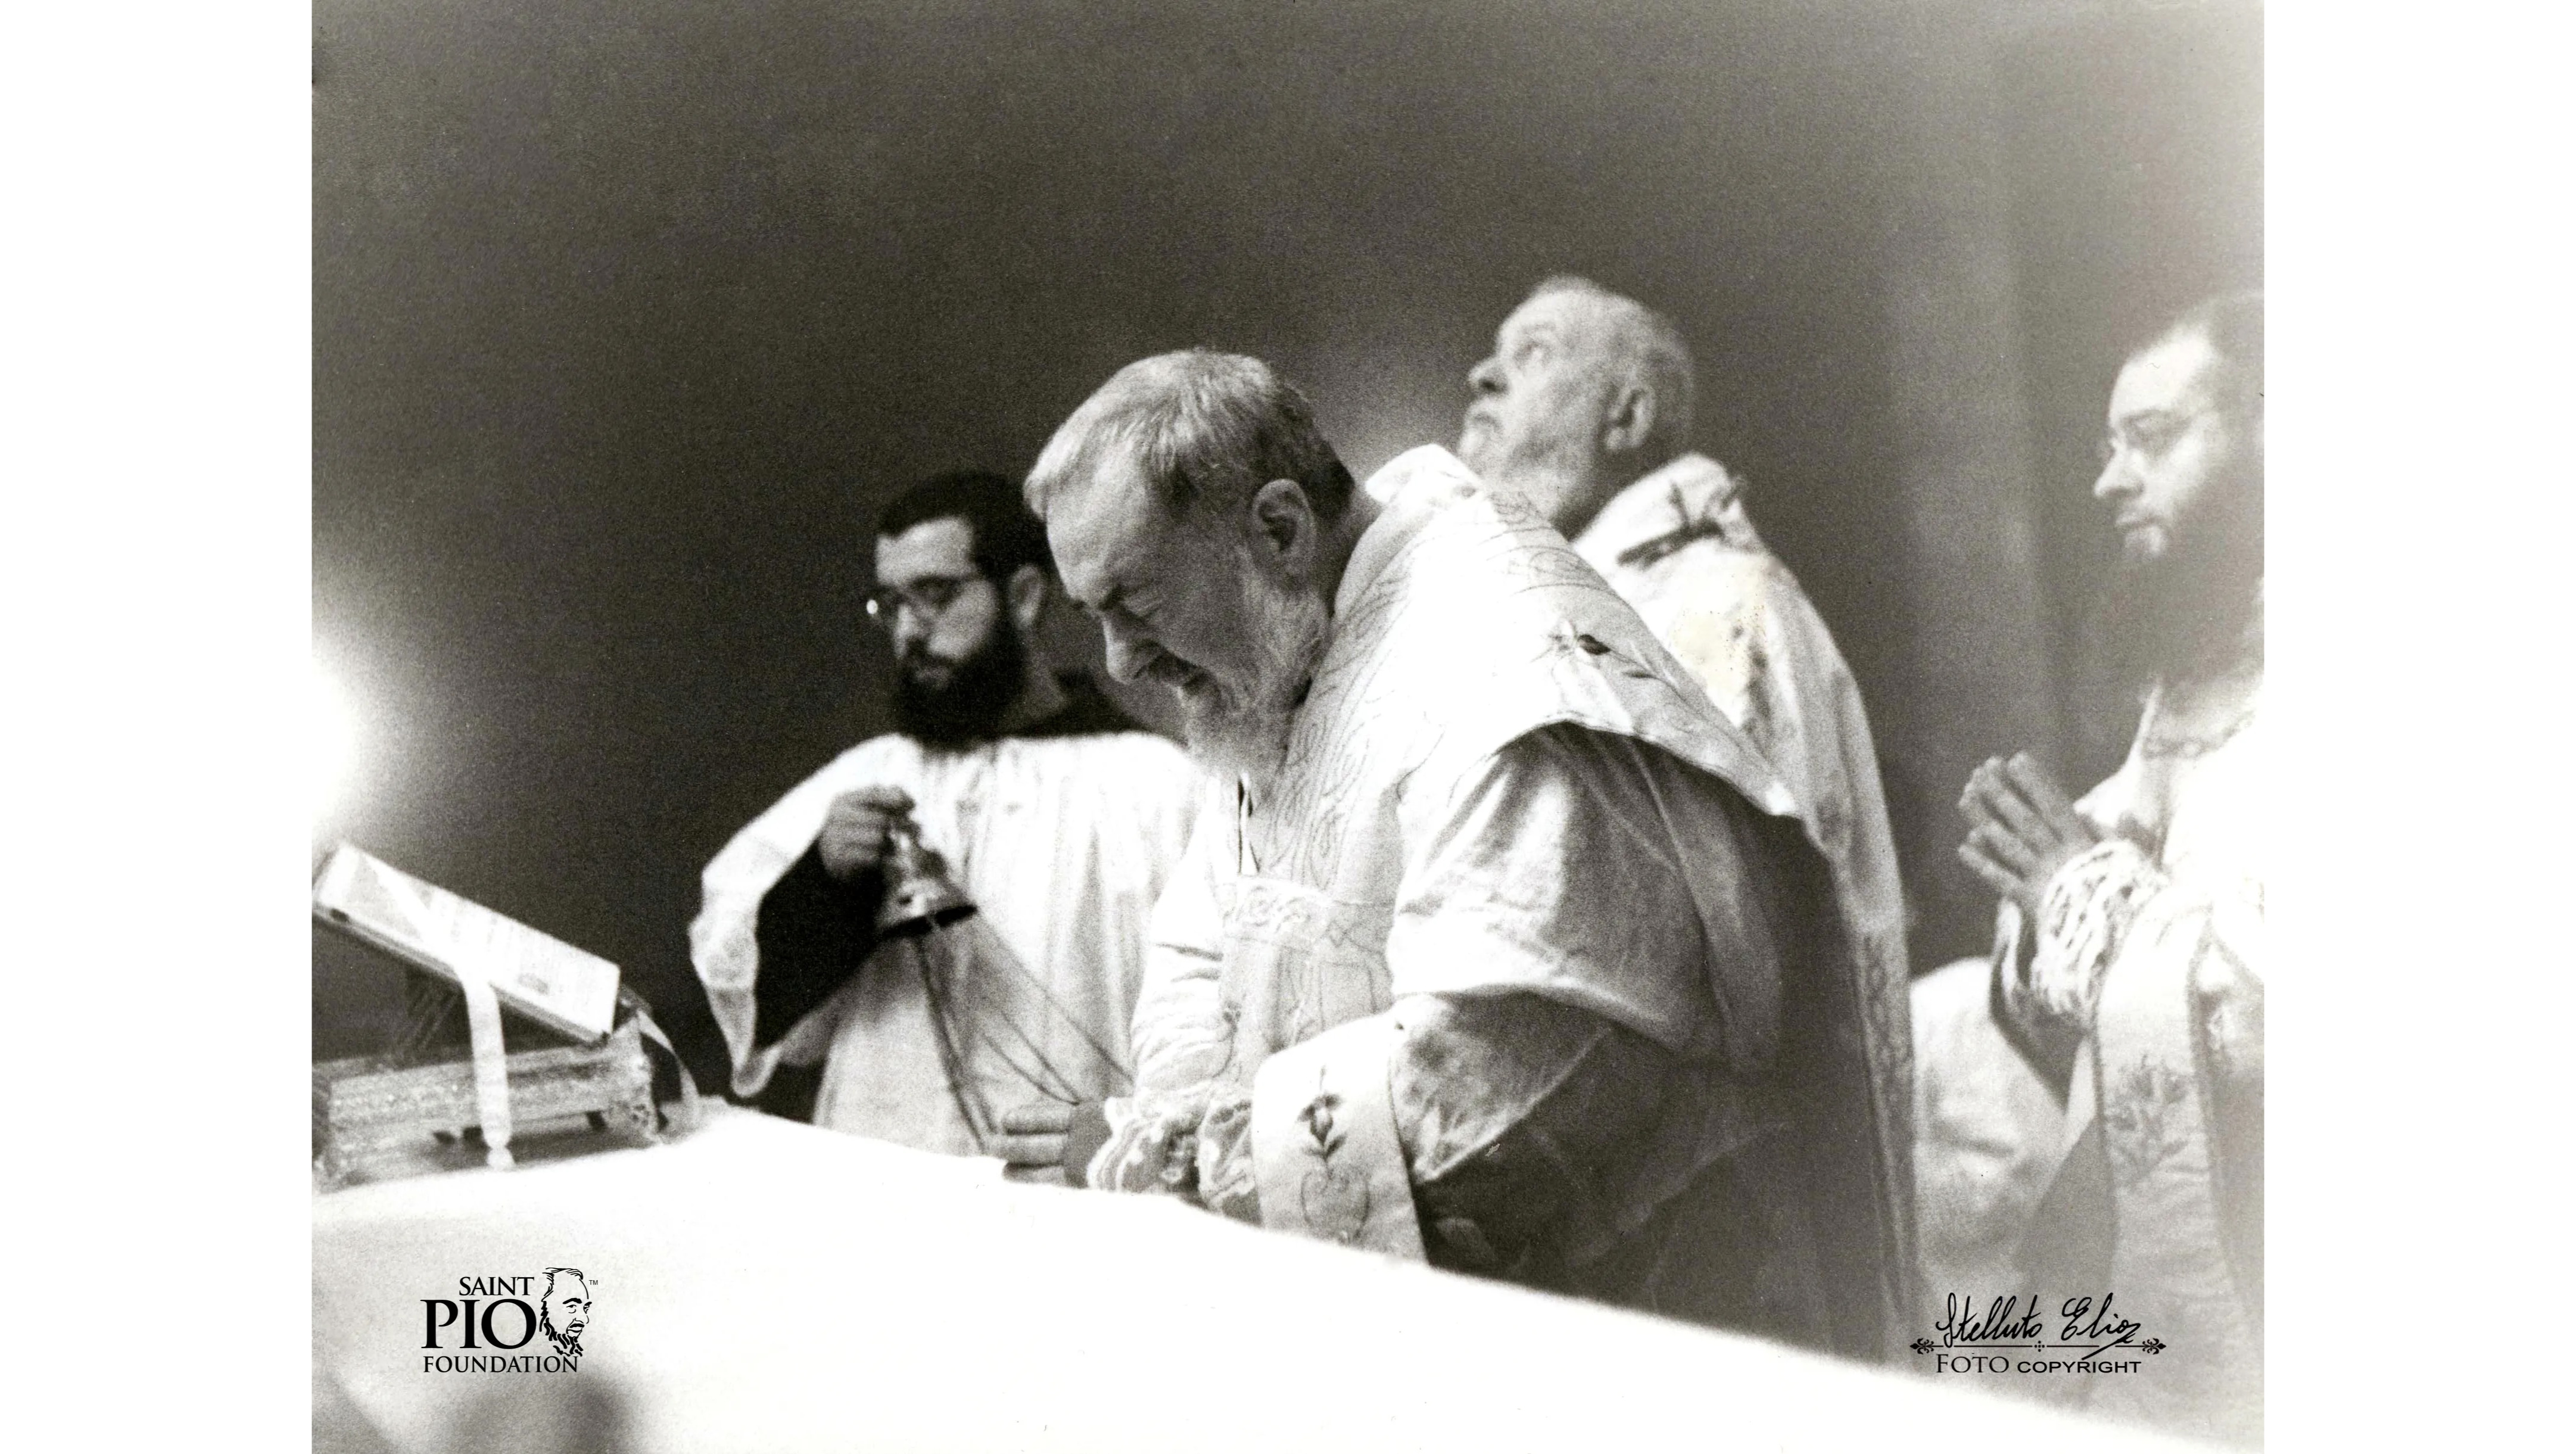 Black and white photo of Padre Pio celebrating Mass, taken by Elia Stelluto, published by the Saint Pio Foundation